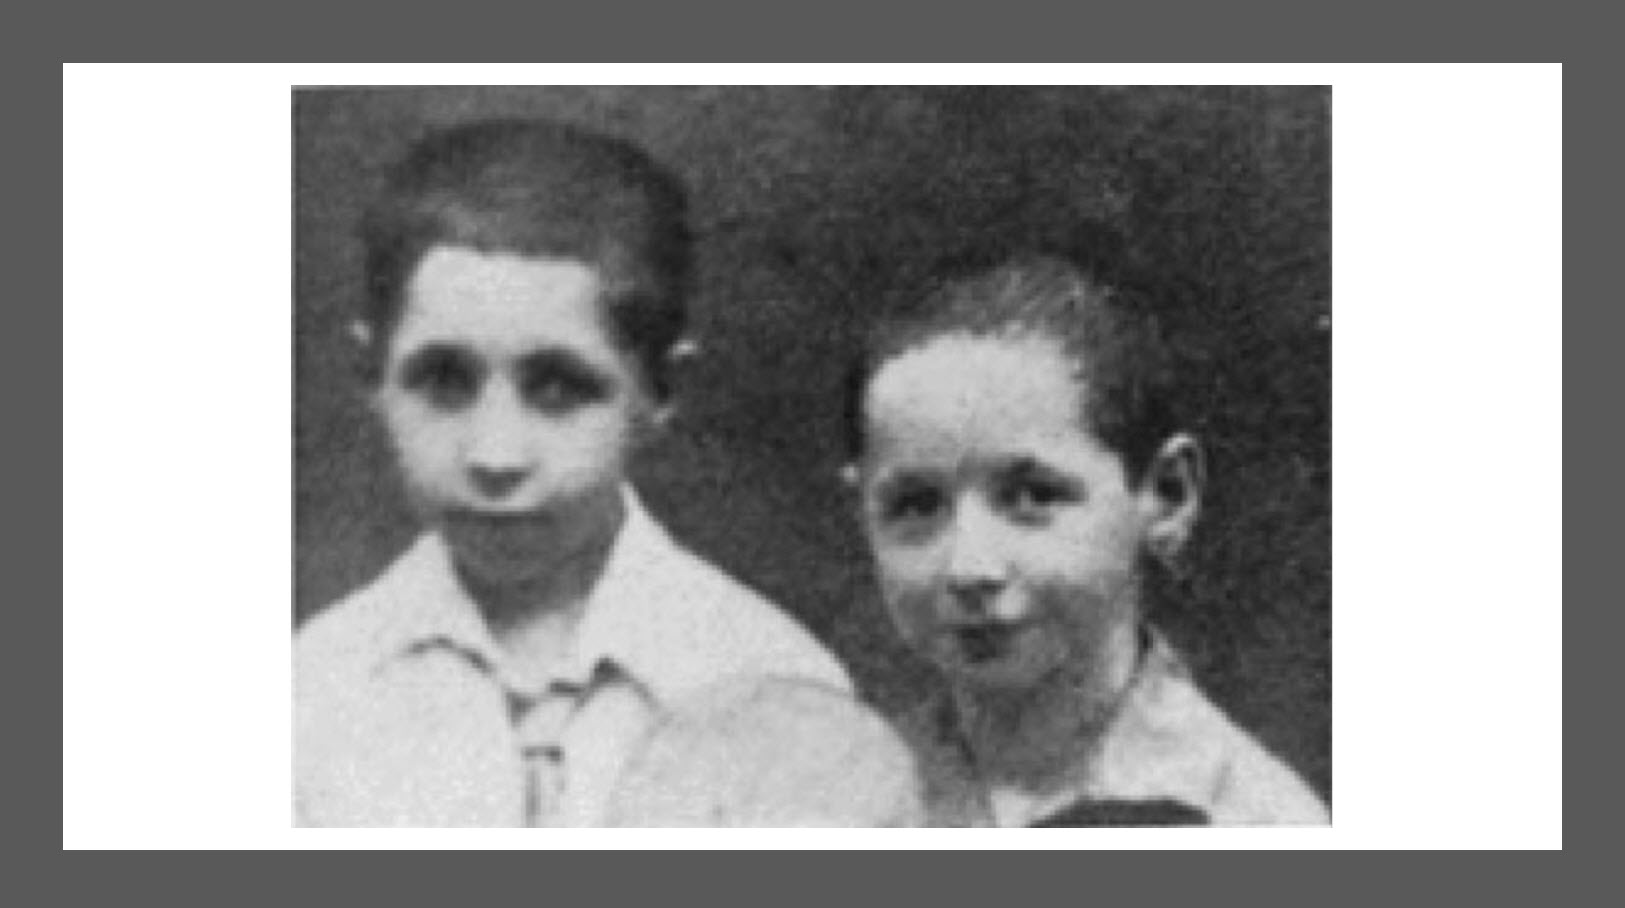 Asher's brothers who were murdered